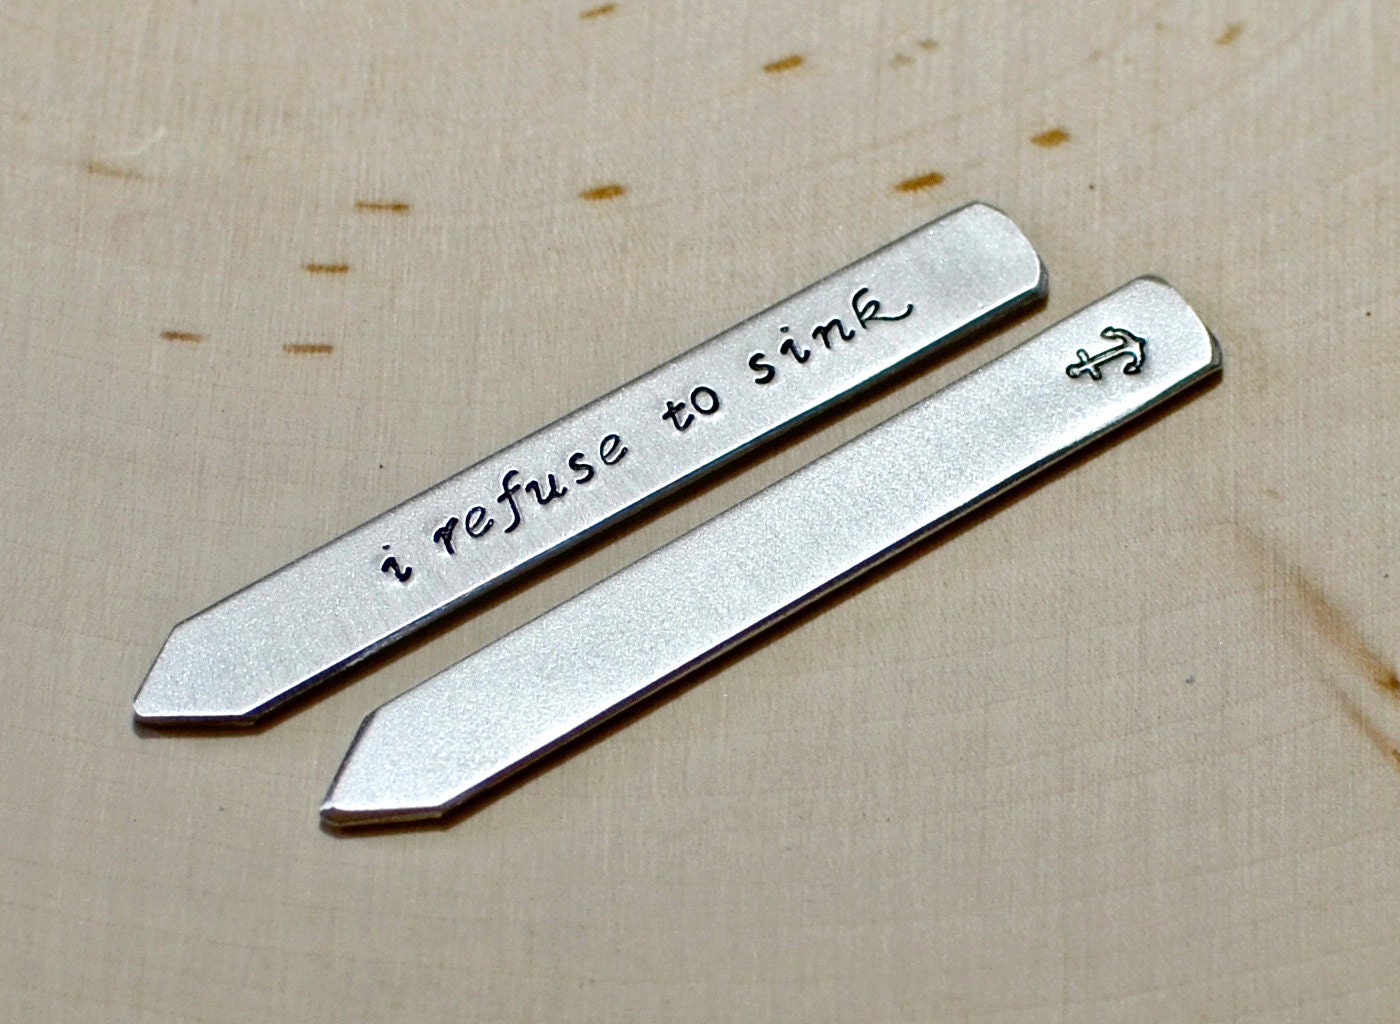 Refuse to sink collar stays in aluminum